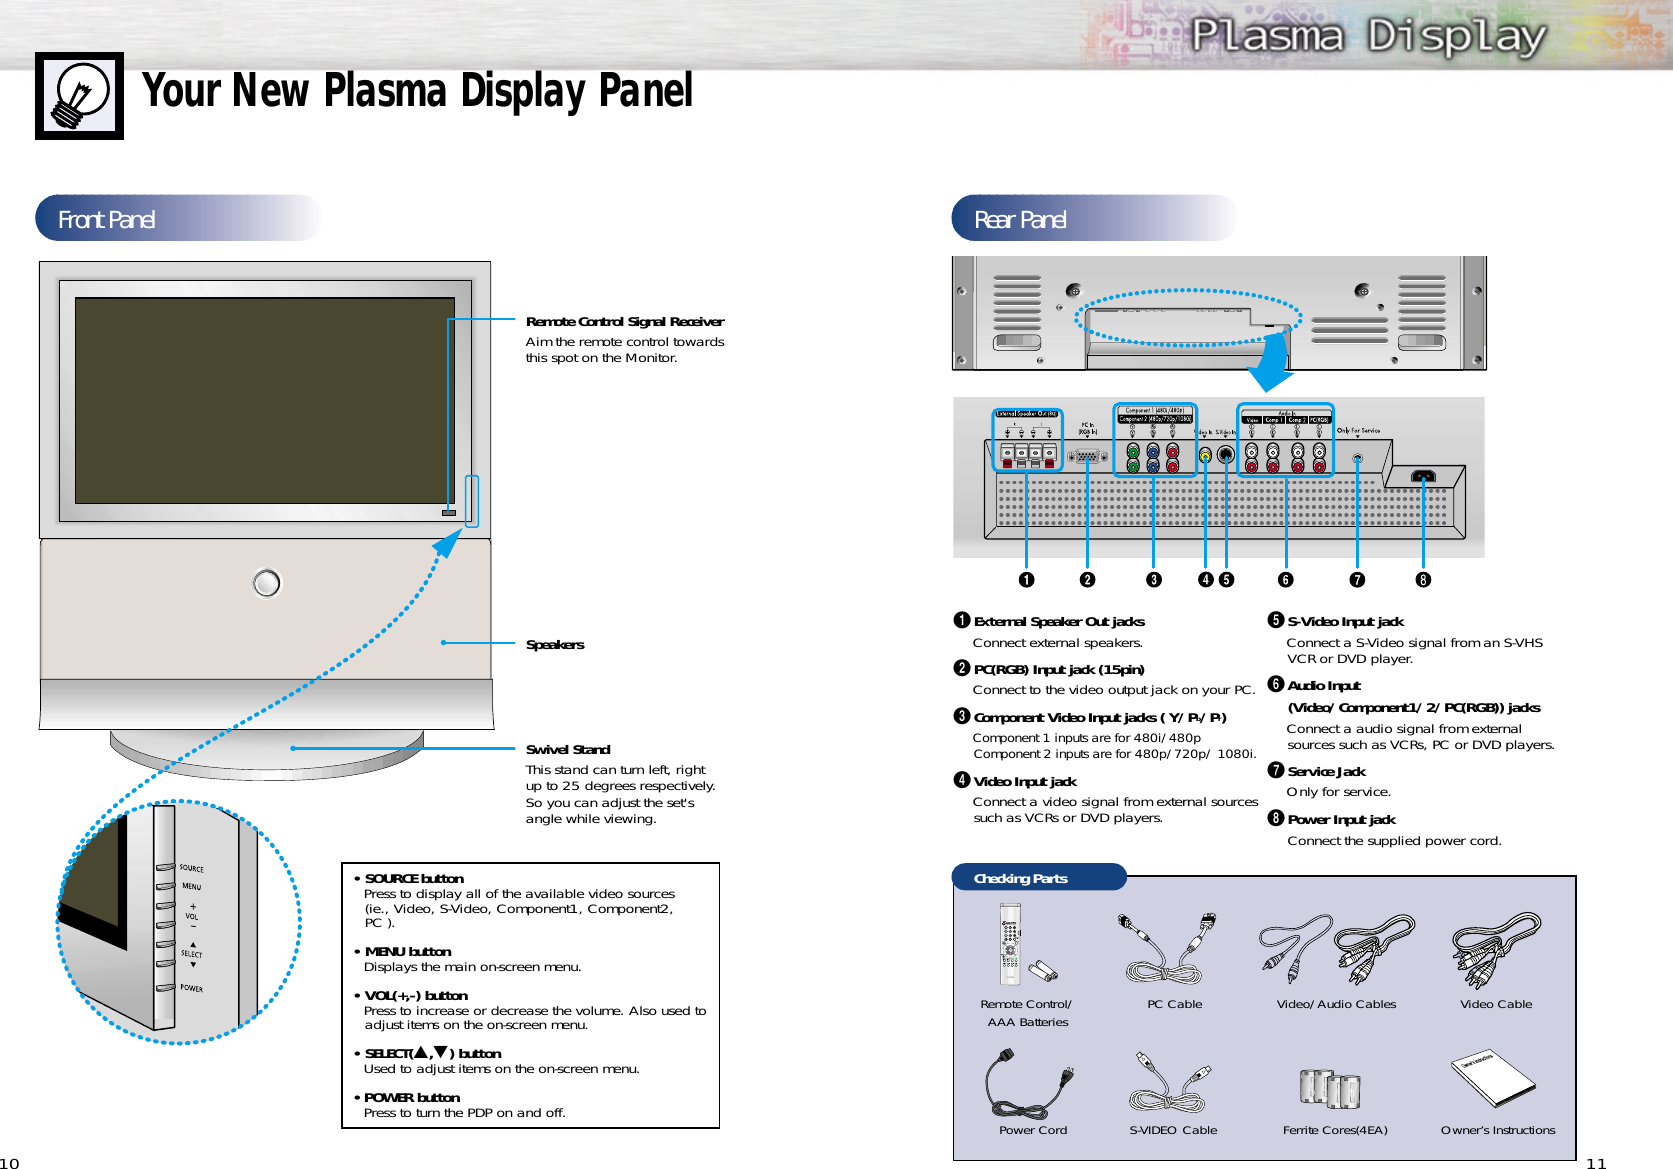 Front Panel11Your New Plasma Display Panel10Rear PanelŒExternal Speaker Out jacksConnect external speakers.´PC(RGB) Input jack (15pin)Connect to the video output jack on your PC.ˇComponent Video Input jacks ( Y/Pb/Pr)Component 1 inputs are for 480i/480pComponent 2 inputs are for 480p/720p/ 1080i.¨Video Input jackConnect a video signal from external sourcessuch as VCRs or DVD players.ˆS-Video Input jackConnect a S-Video signal from an S-VHSVCR or DVD player.ØAudio Input(Video/Component1/2/PC(RGB)) jacksConnect a audio signal from externalsources such as VCRs, PC or DVD players.∏Service JackOnly for service.”Power Input jackConnect the supplied power cord.Remote Control Signal Receiver Aim the remote control towards this spot on the Monitor.• SOURCE buttonPress to display all of the available video sources (ie., Video, S-Video, Component1, Component2, PC ).• MENU buttonDisplays the main on-screen menu.• VOL(+,-) buttonPress to increase or decrease the volume. Also used toadjust items on the on-screen menu.• SELECT(▲,▼) buttonUsed to adjust items on the on-screen menu.• POWER buttonPress to turn the PDP on and off.Swivel StandThis stand can turn left, rightup to 25 degrees respectively.So you can adjust the set&apos;sangle while viewing.SpeakersChecking PartsRemote Control/AAA BatteriesPower Cord S-VIDEO Cable Ferrite Cores(4EA)PC Cable Video CableVideo/Audio CablesOwner’s Instructions